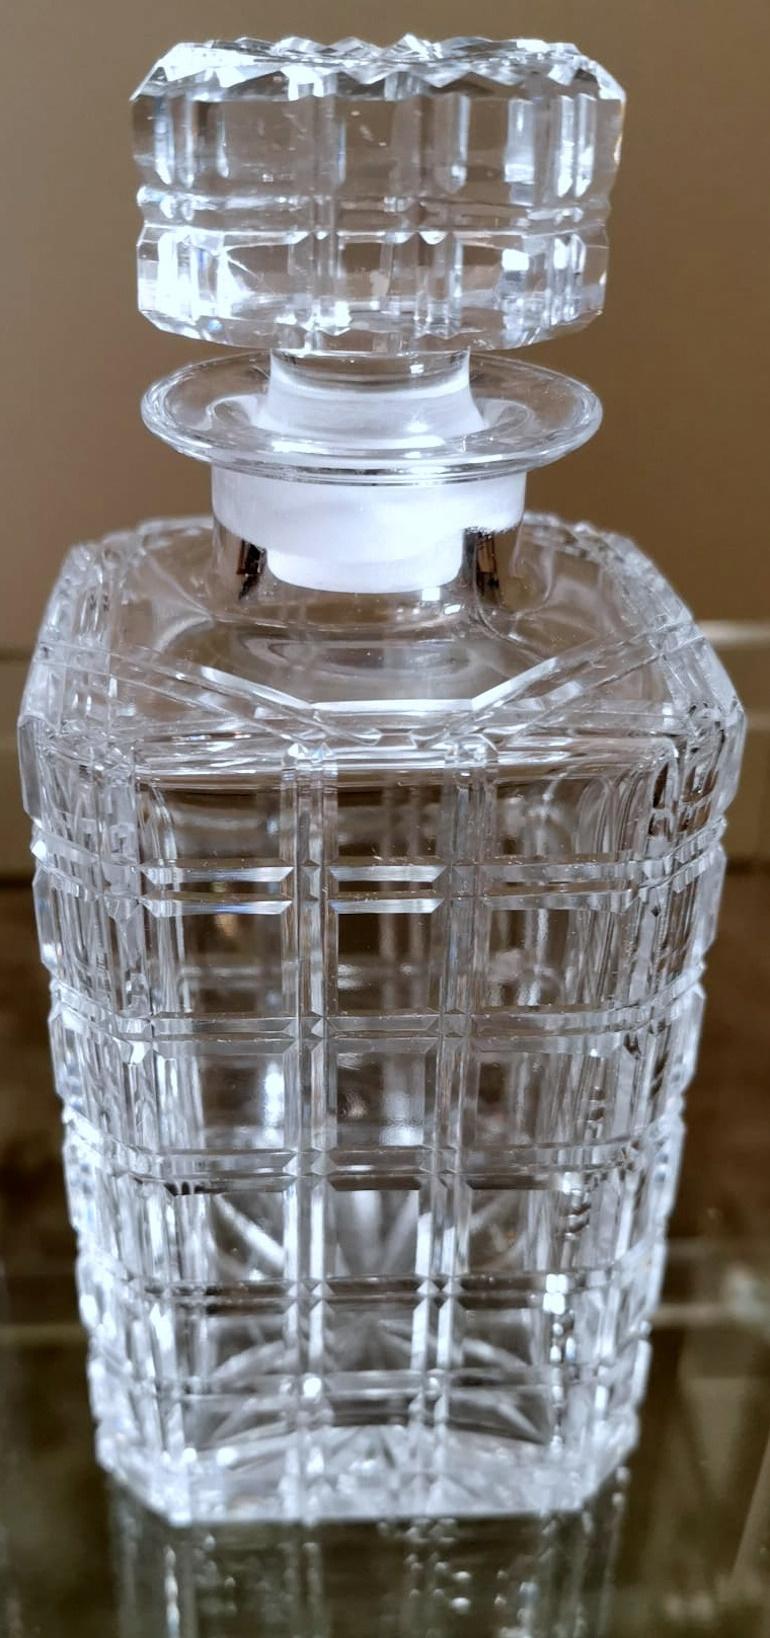 Hand-Crafted Florentine Handcrafted Crystal Bottle Ground, Cut And Polished By Hand For Sale